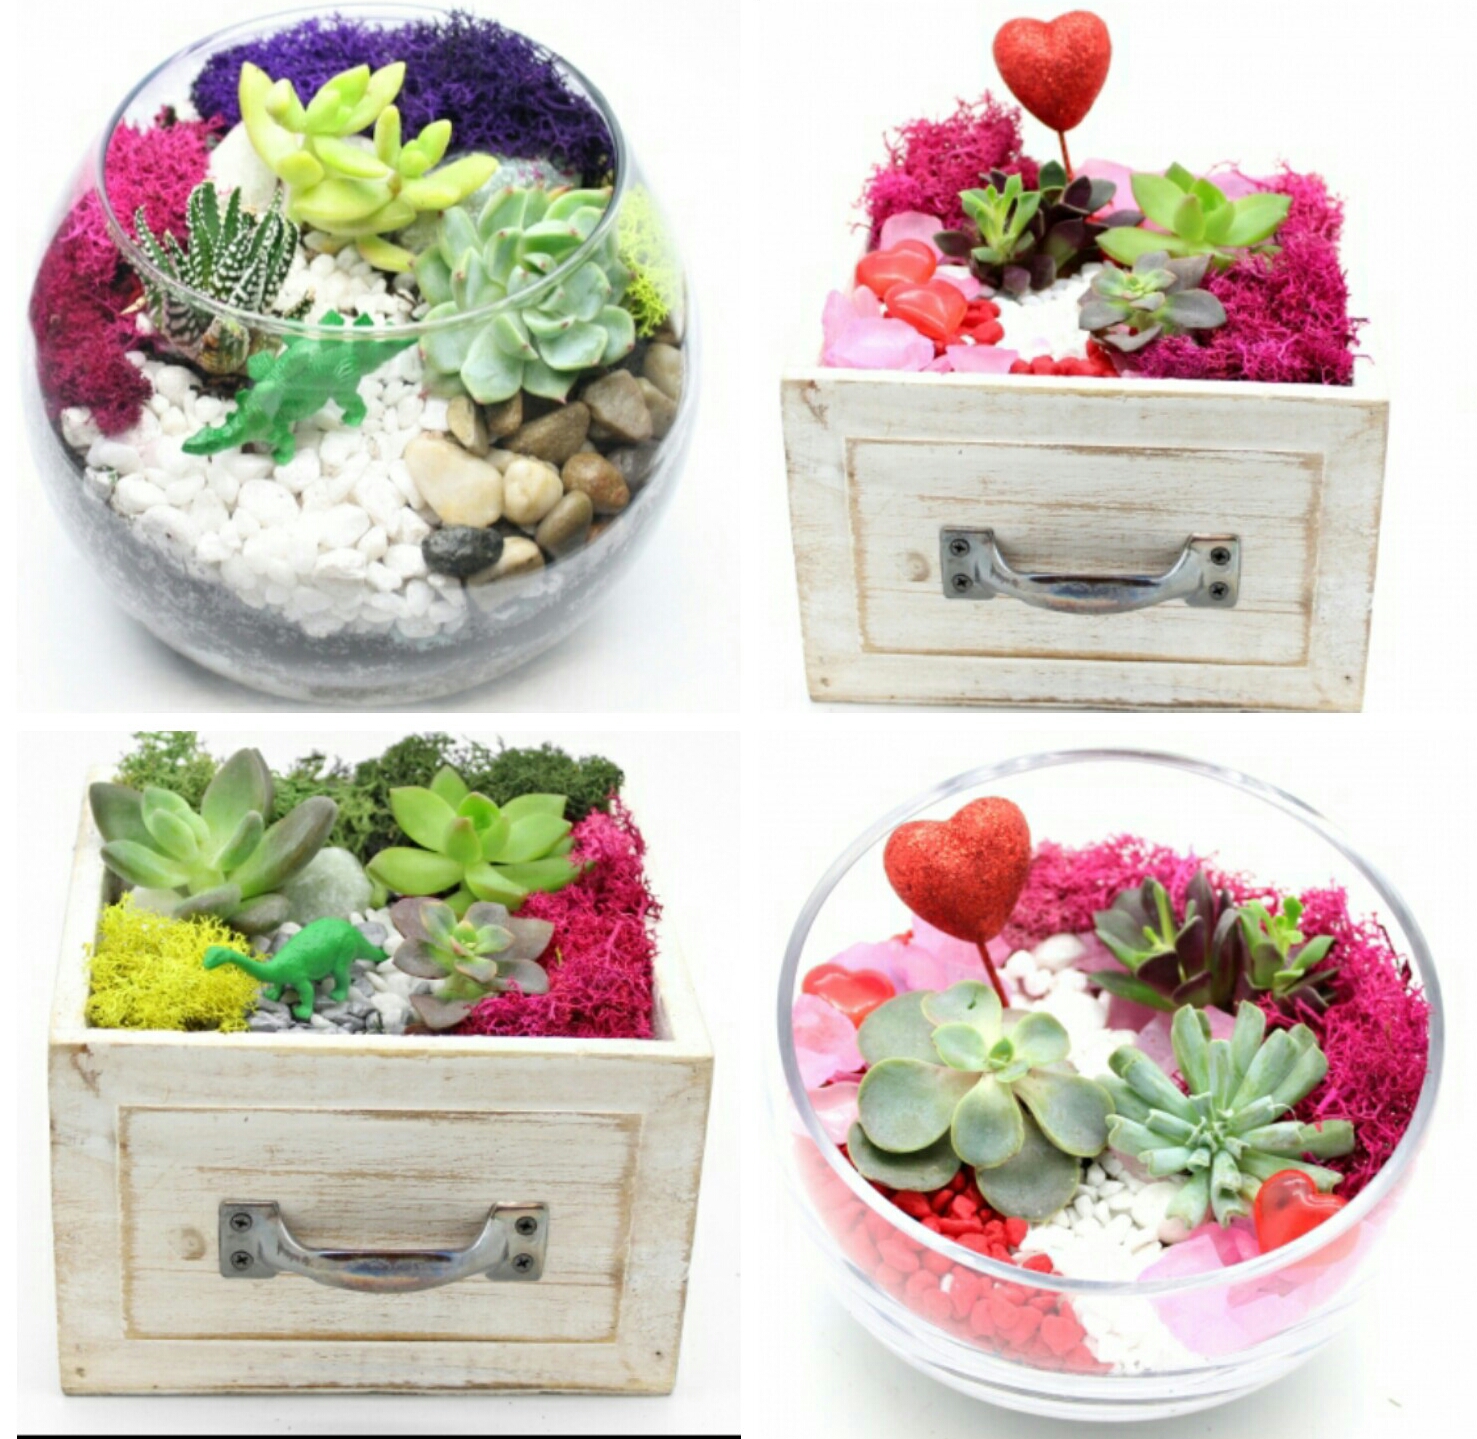 A Create a Valentine or Classic Design Succulent Garden Pick the Wood Drawer Glass Container plant nite project by Yaymaker